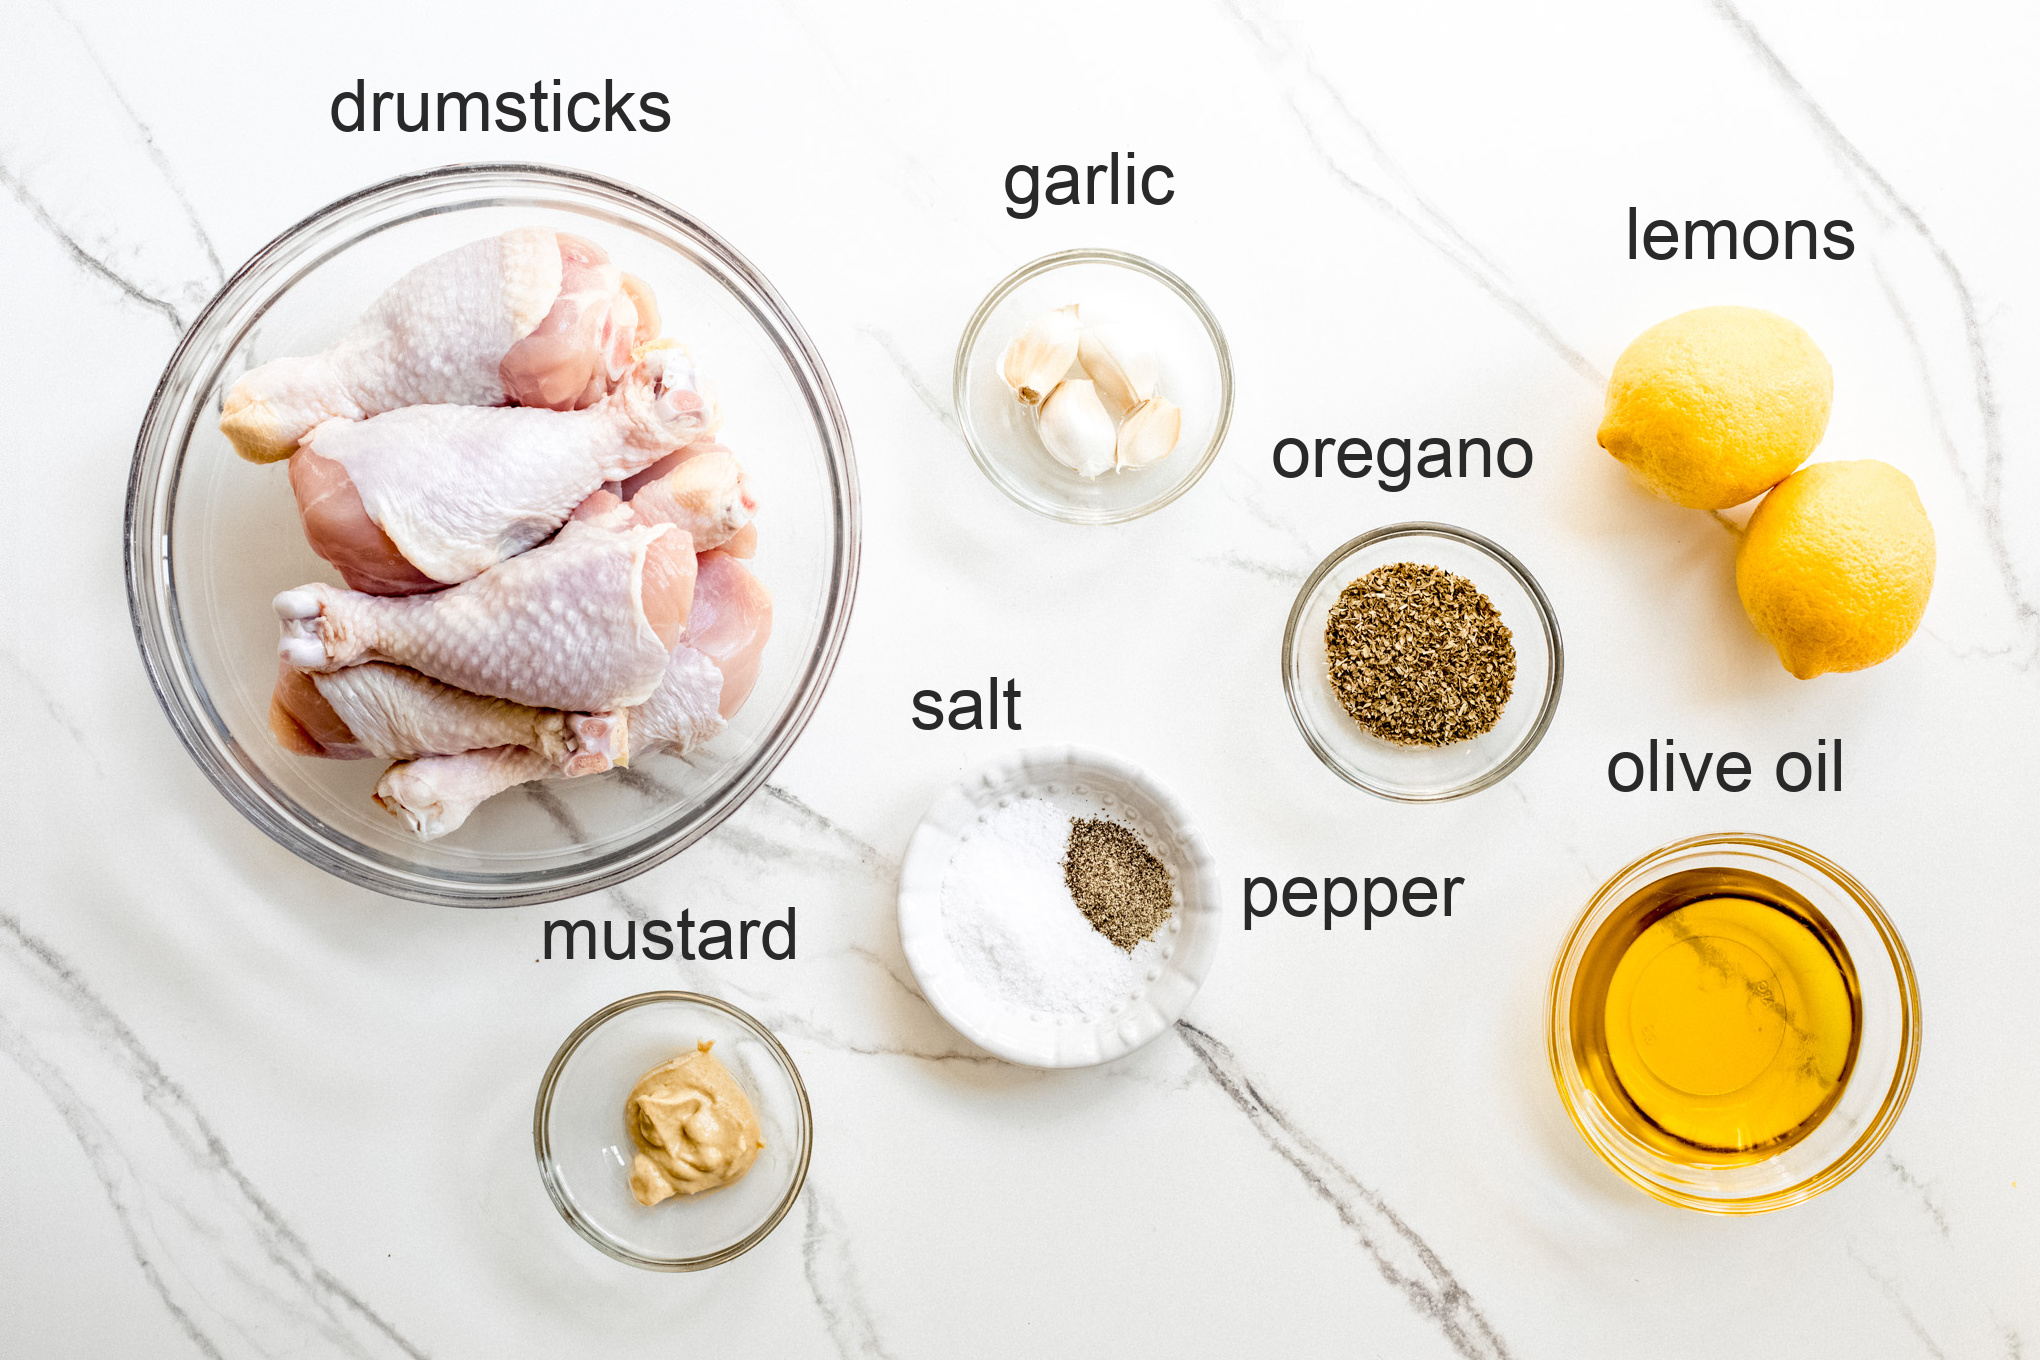 ingredients for grilled chicken legs recipe.